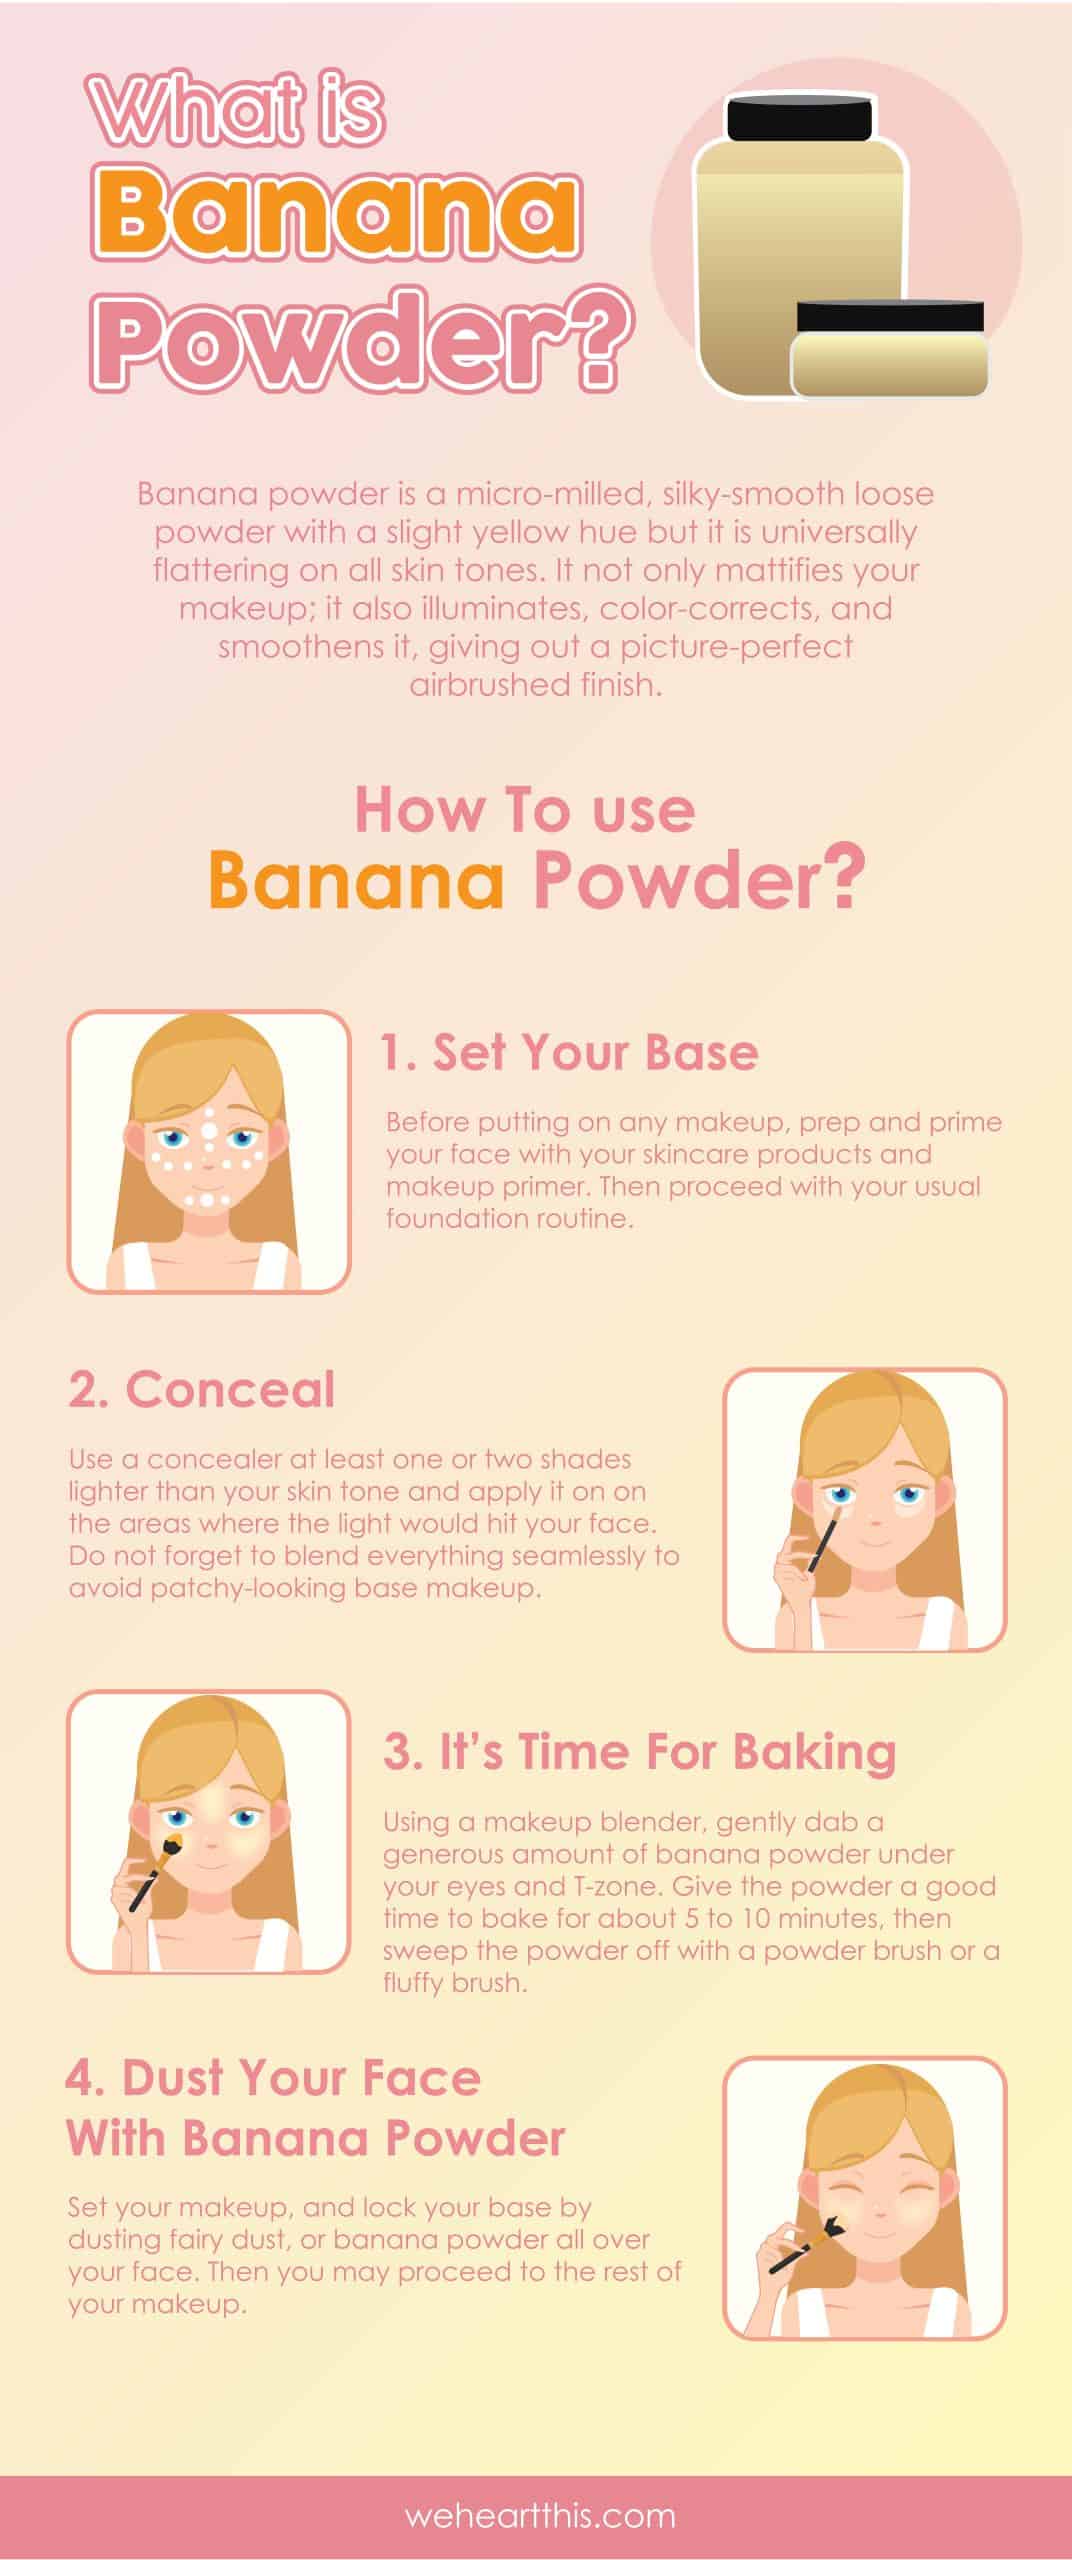 infographic about banana powder and on how to use it